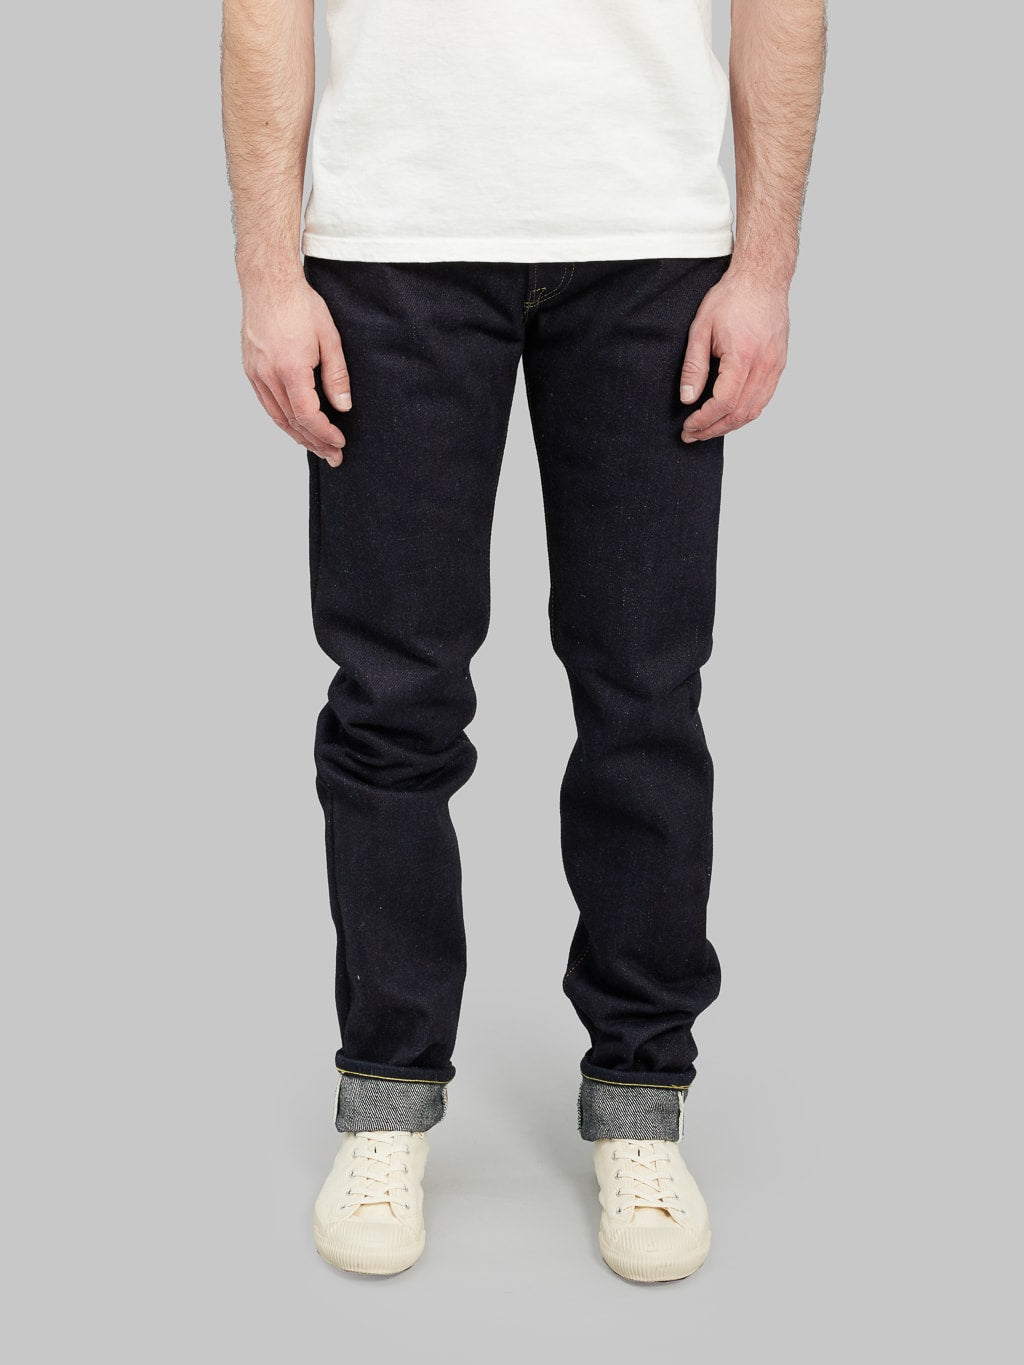 The Strike Gold Extra Heavyweight straight tapered jeans front fit